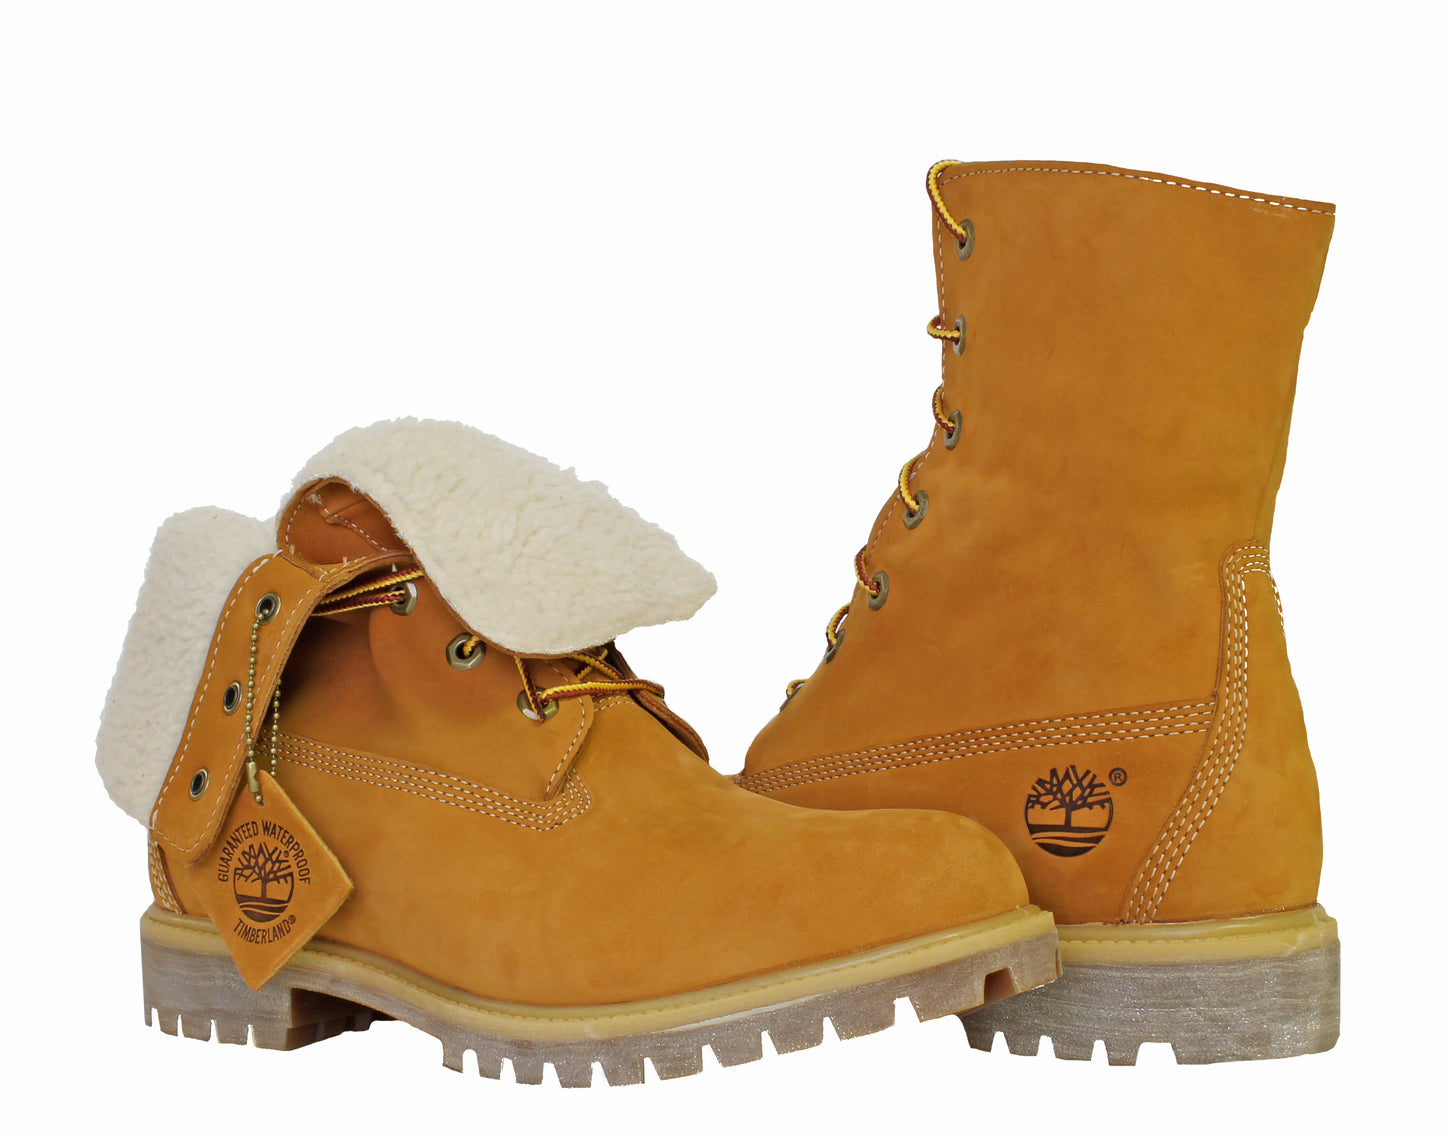 Timberland Roll-Top Warm Lined Waterproof Fold-Down Men's Boots